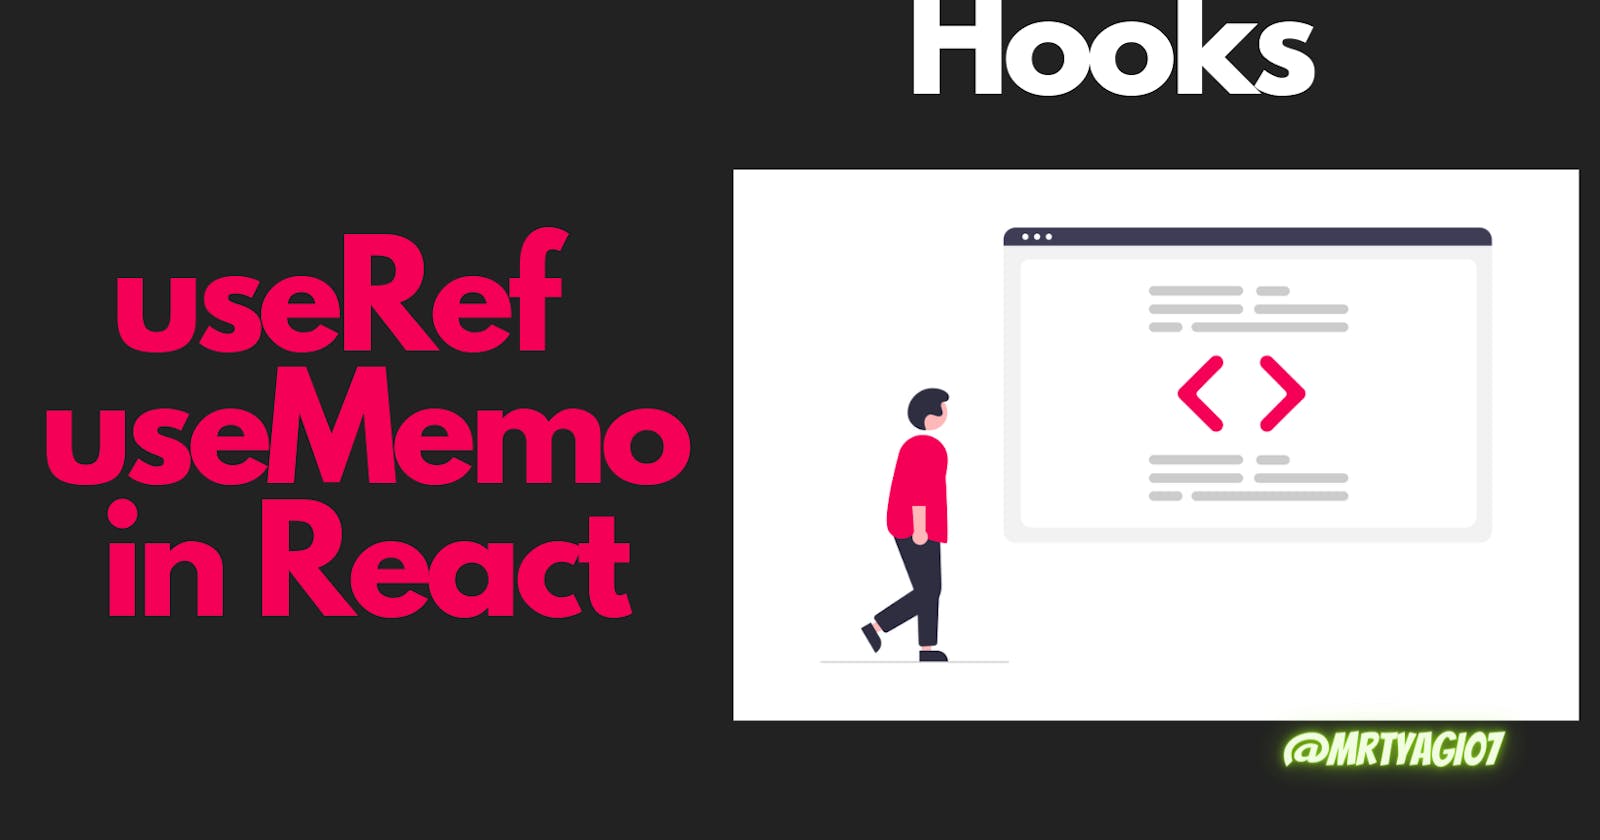 Become a Hooks Pro Part-2: A Hands-on Guide to useRef and useMemo in React